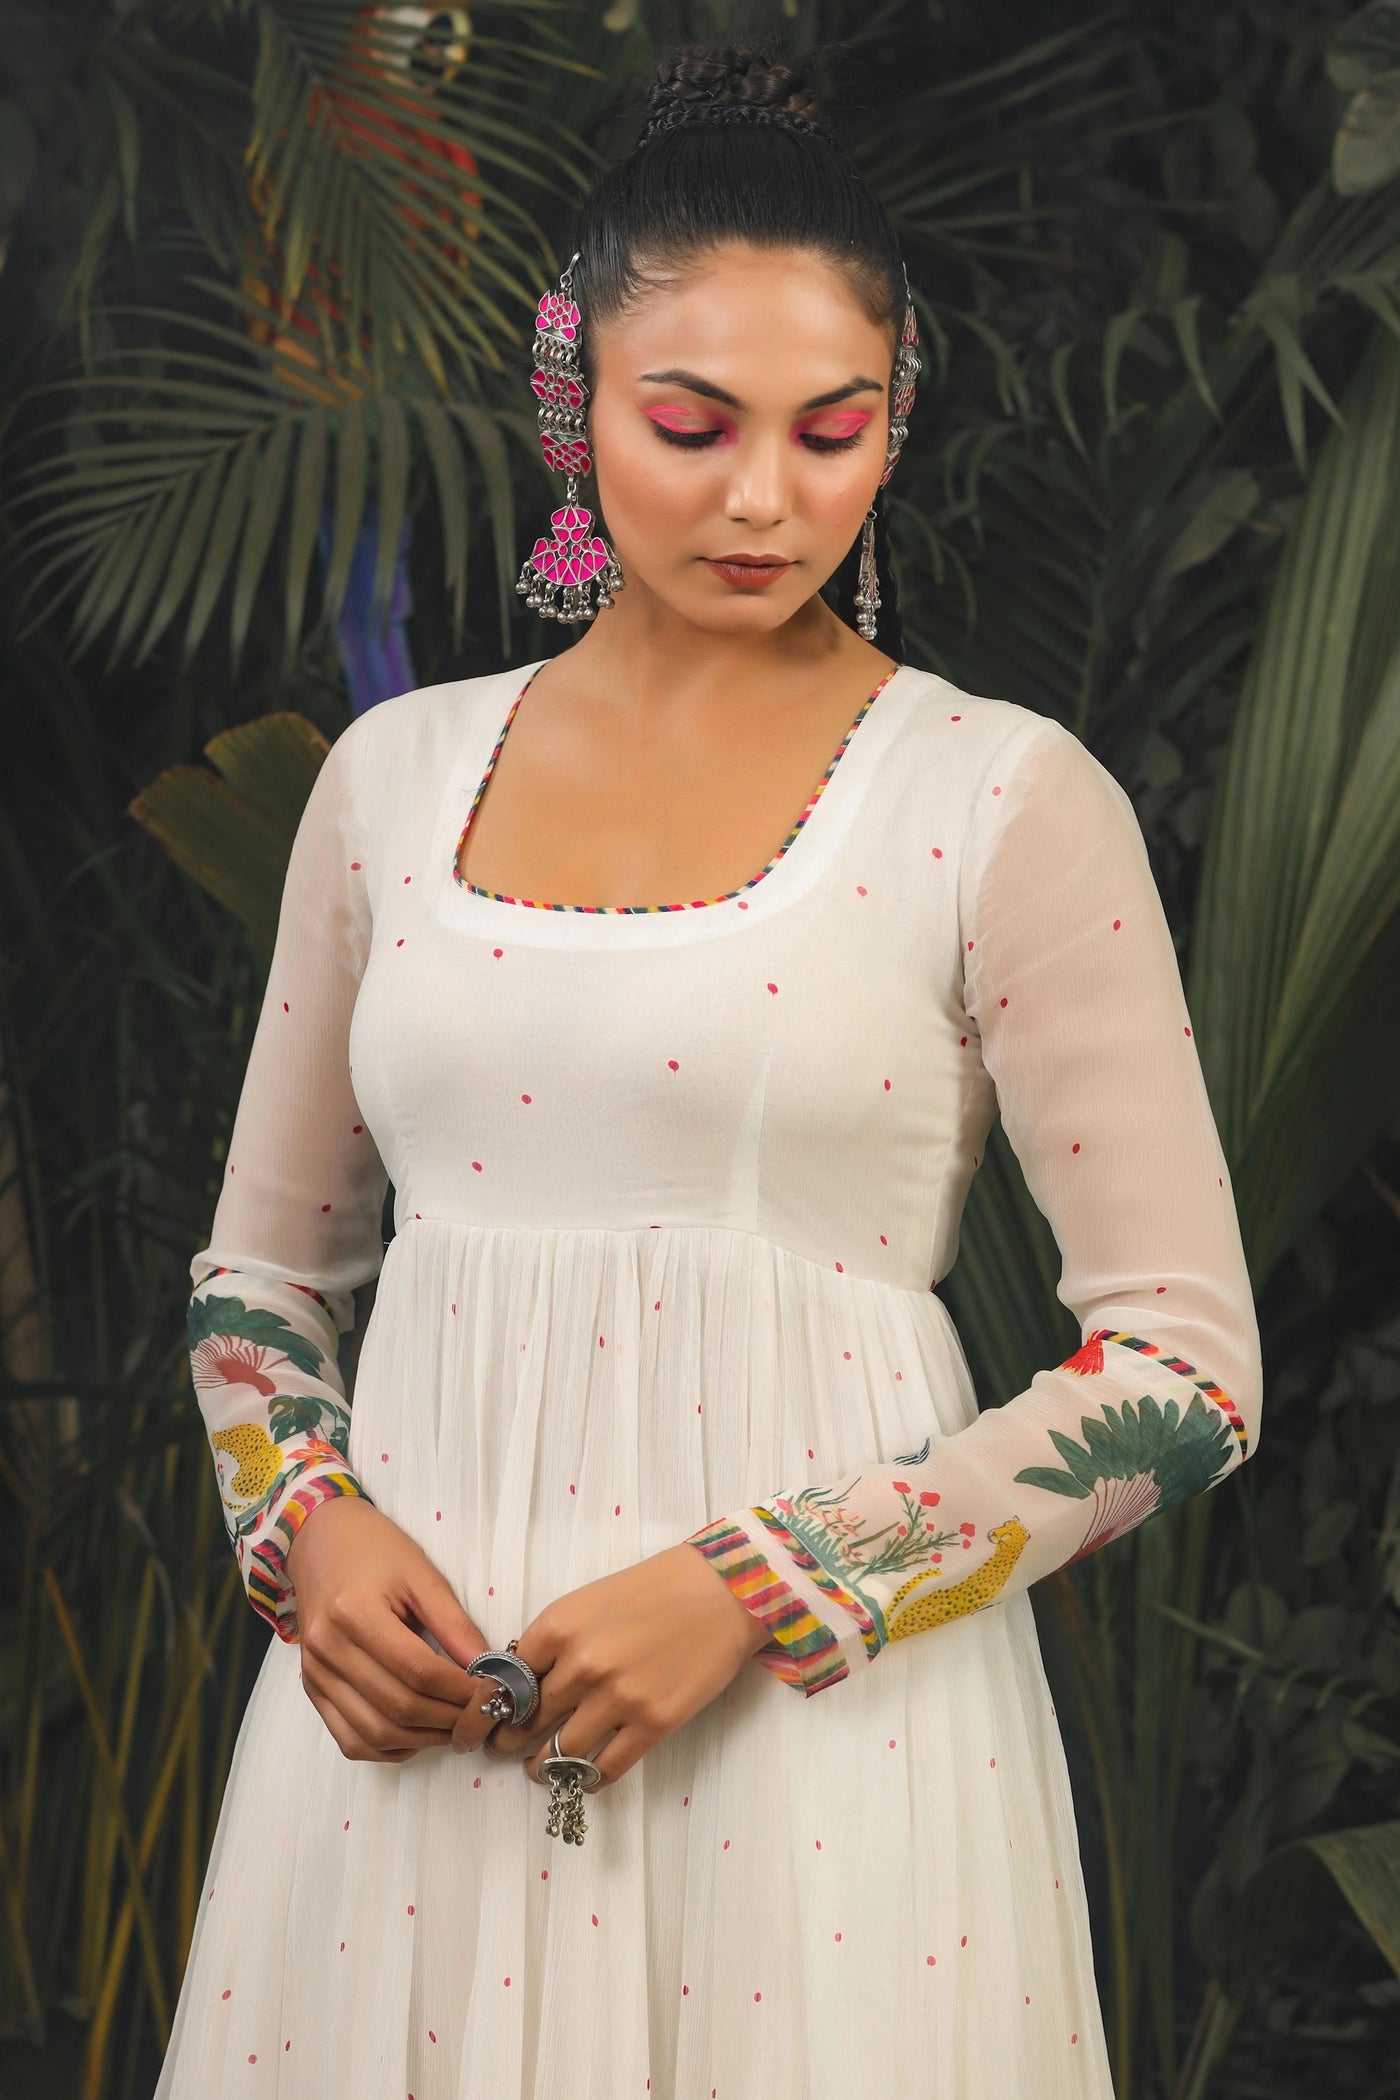 White Tropical Anarkali Indian Clothing in Denver, CO, Aurora, CO, Boulder, CO, Fort Collins, CO, Colorado Springs, CO, Parker, CO, Highlands Ranch, CO, Cherry Creek, CO, Centennial, CO, and Longmont, CO. NATIONWIDE SHIPPING USA- India Fashion X